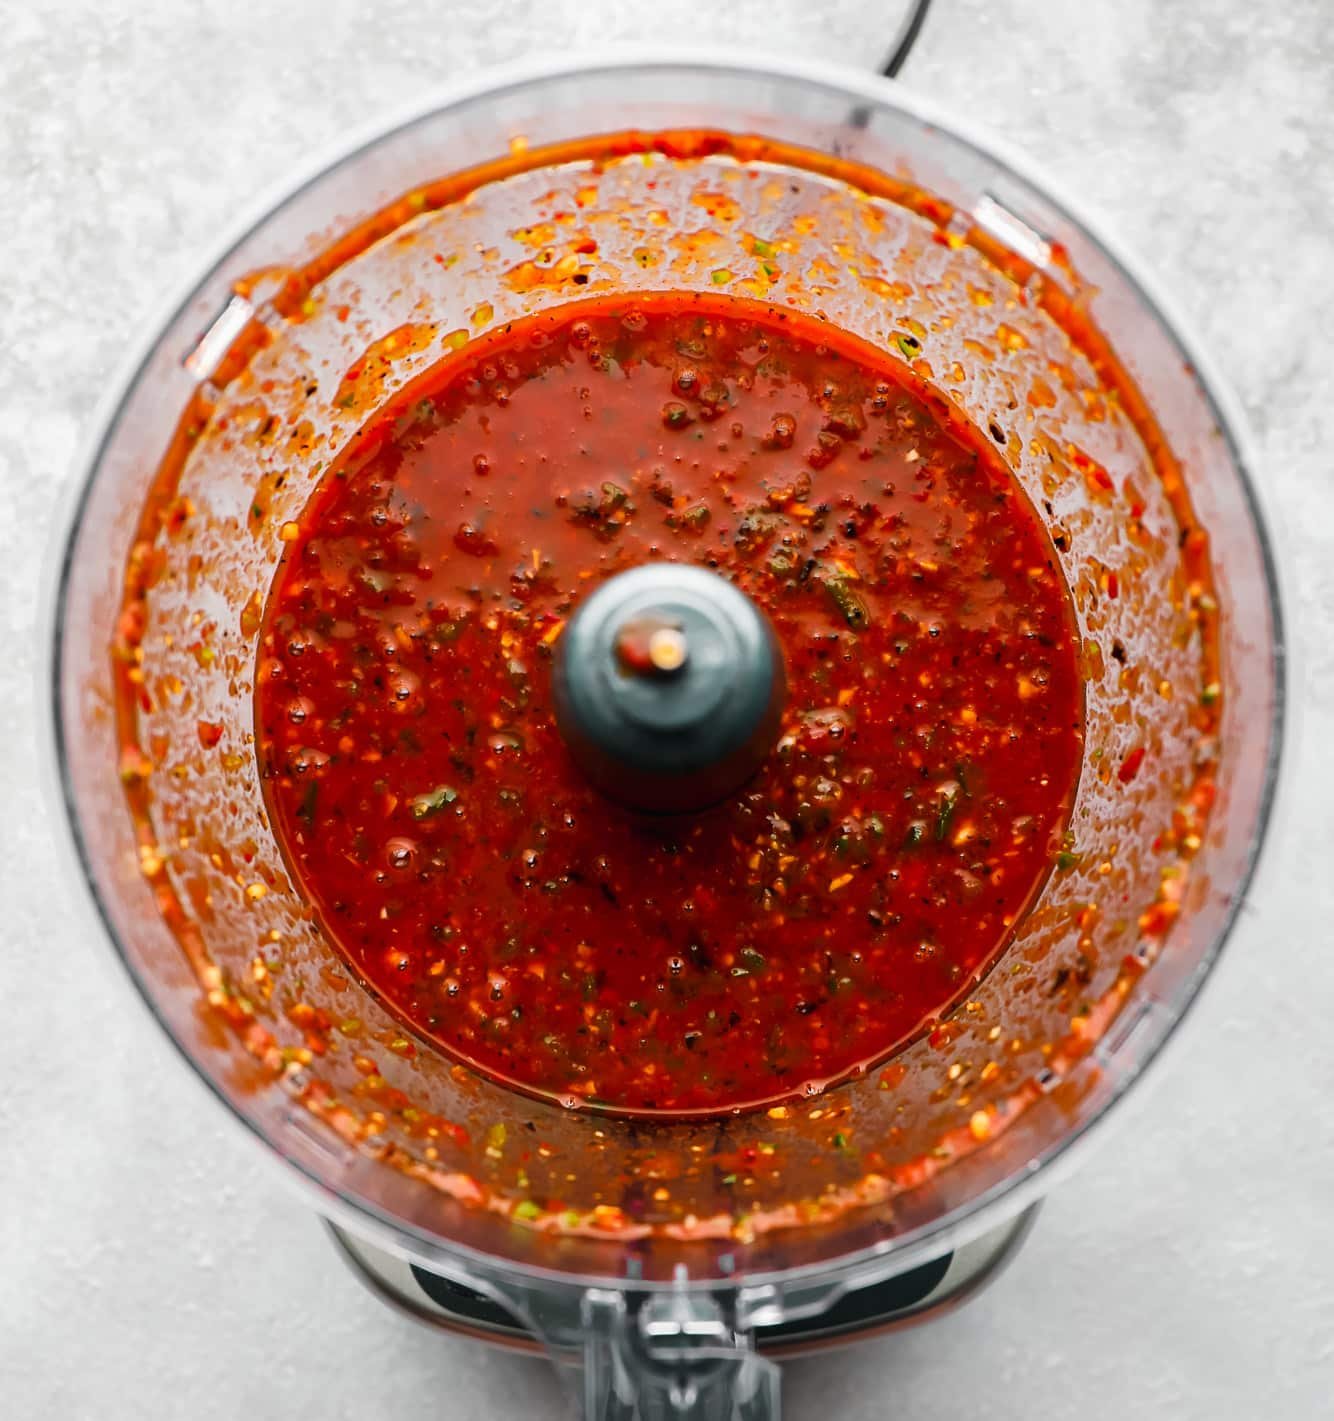 a blended red chili sauce in a food processor.